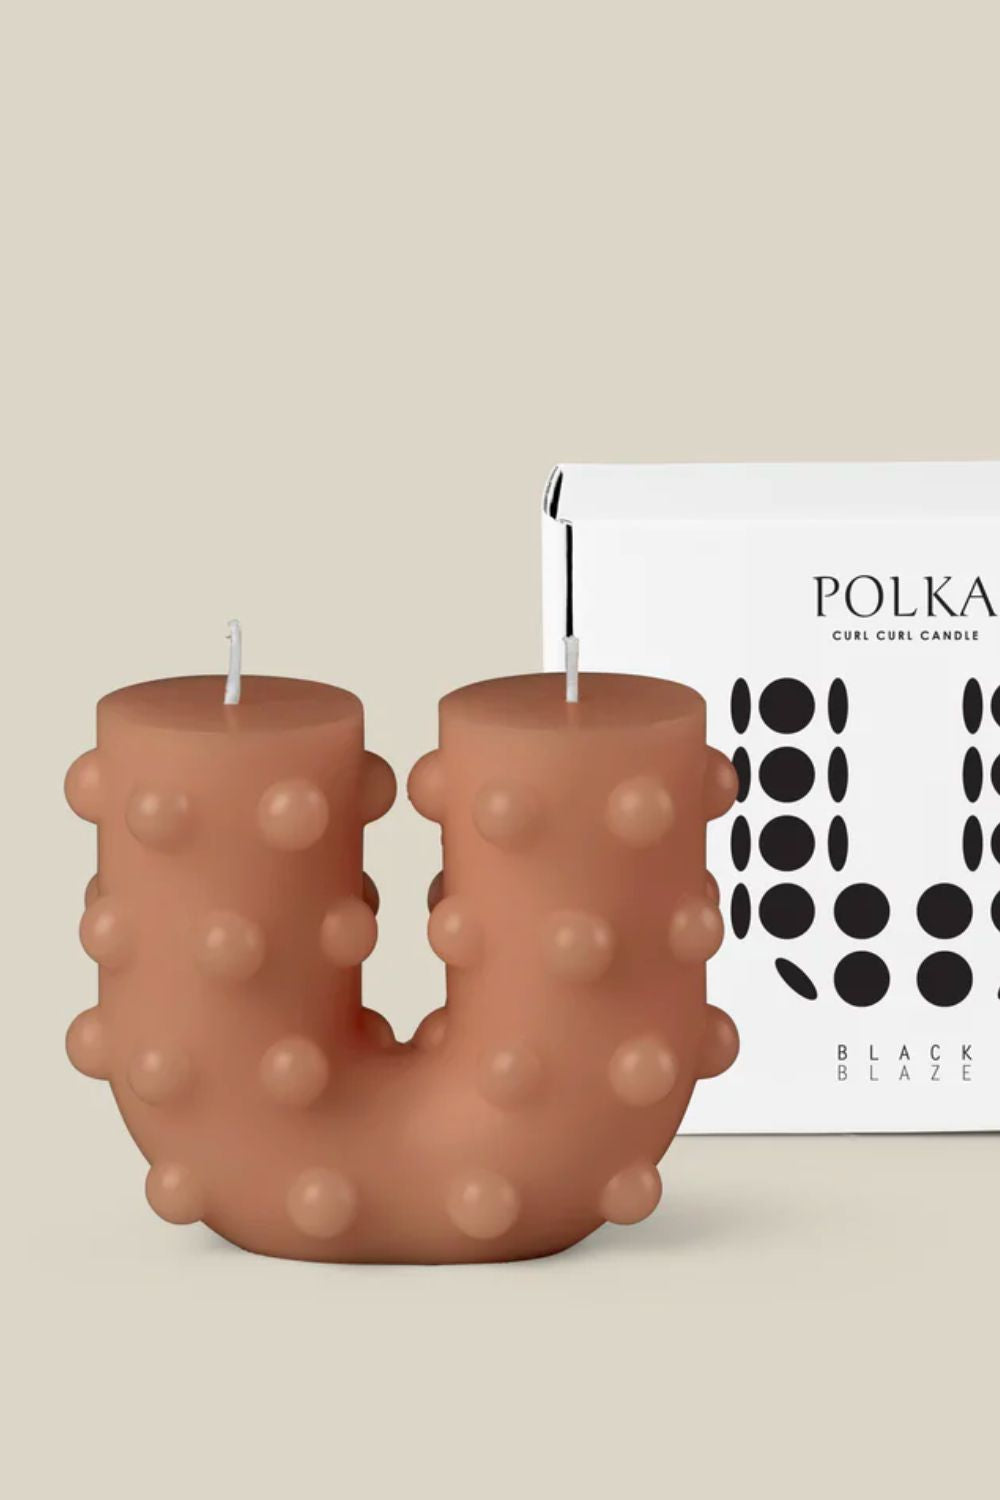 Polka Curl Curl Candle - Nude